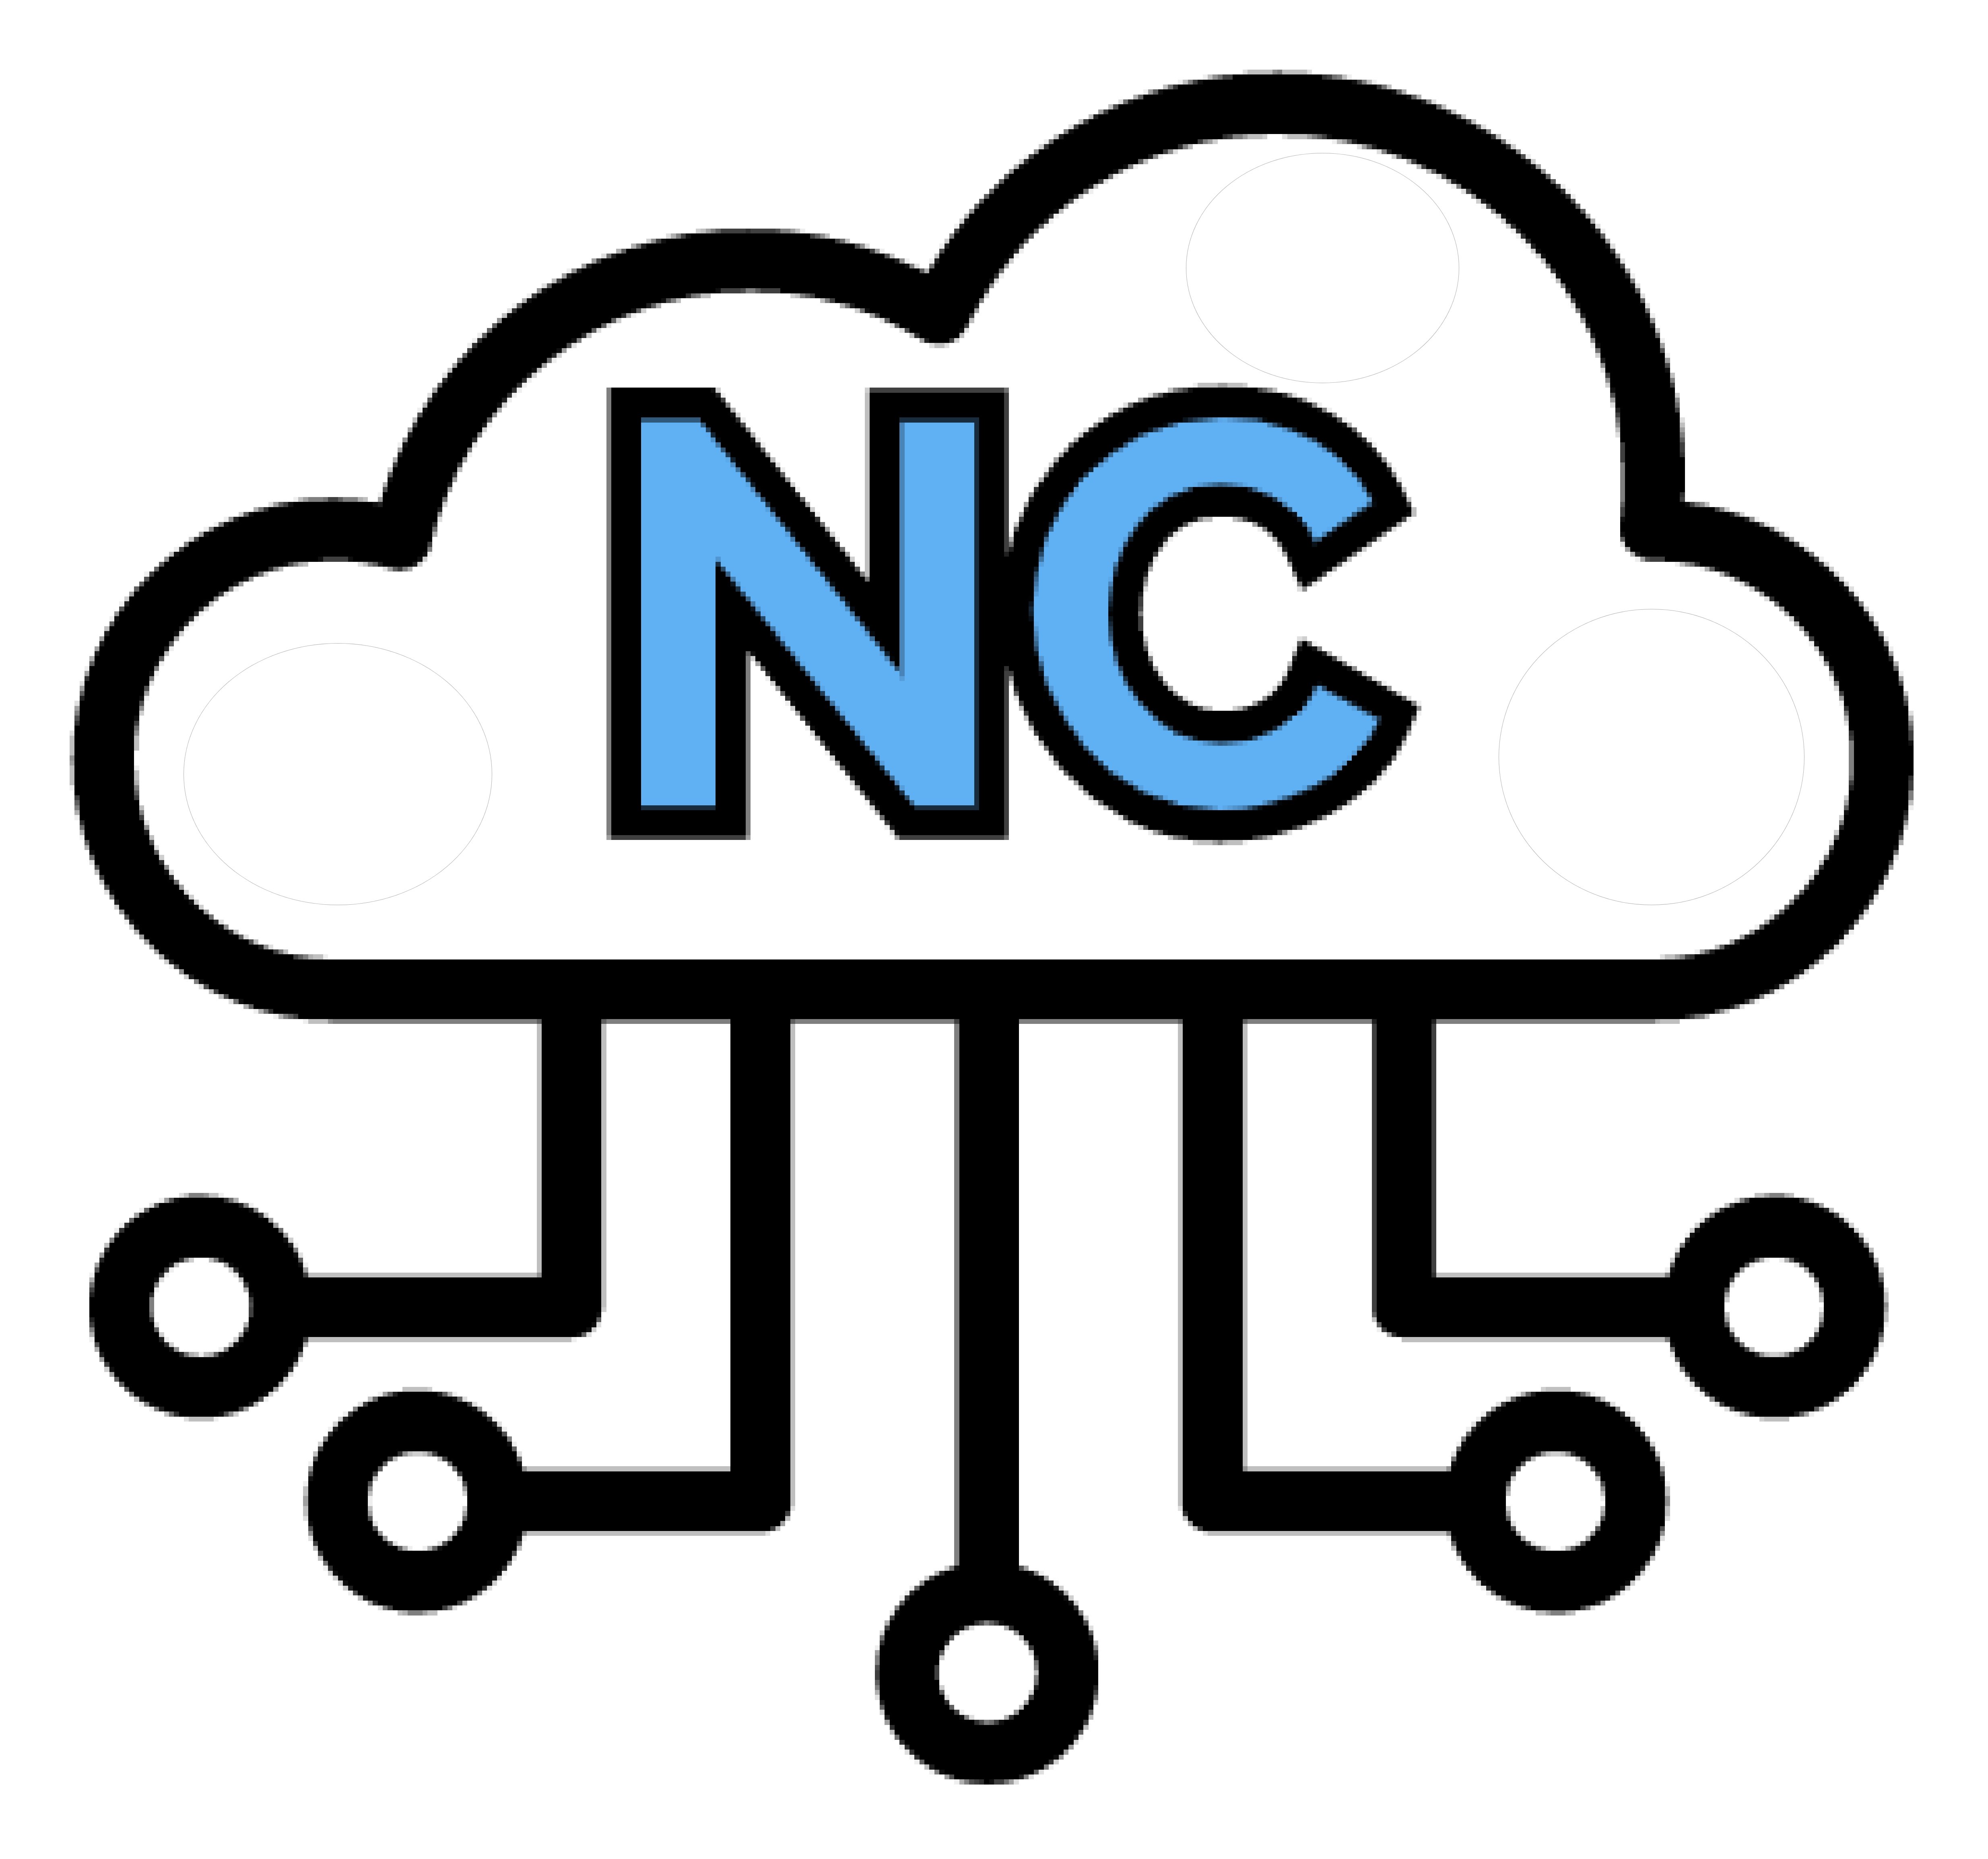 Nick Connection Logo